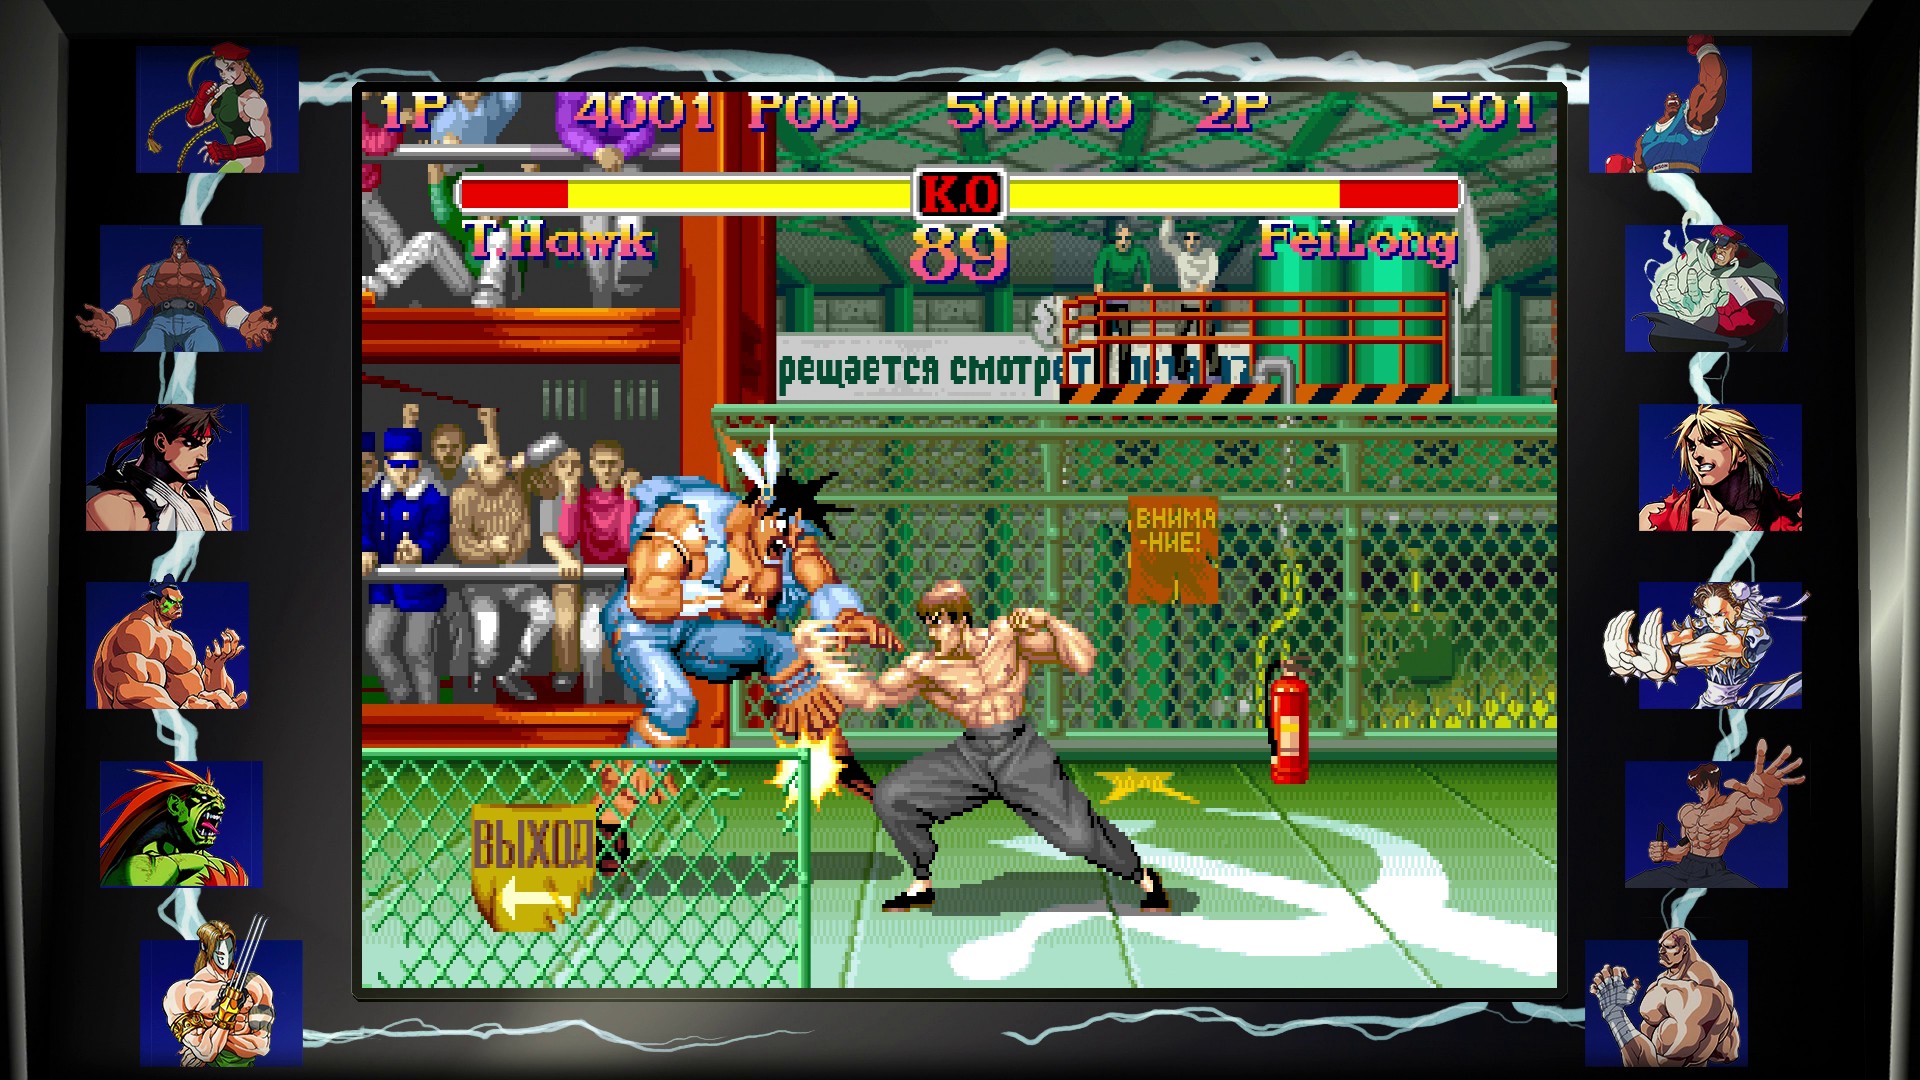 xbox one street fighter